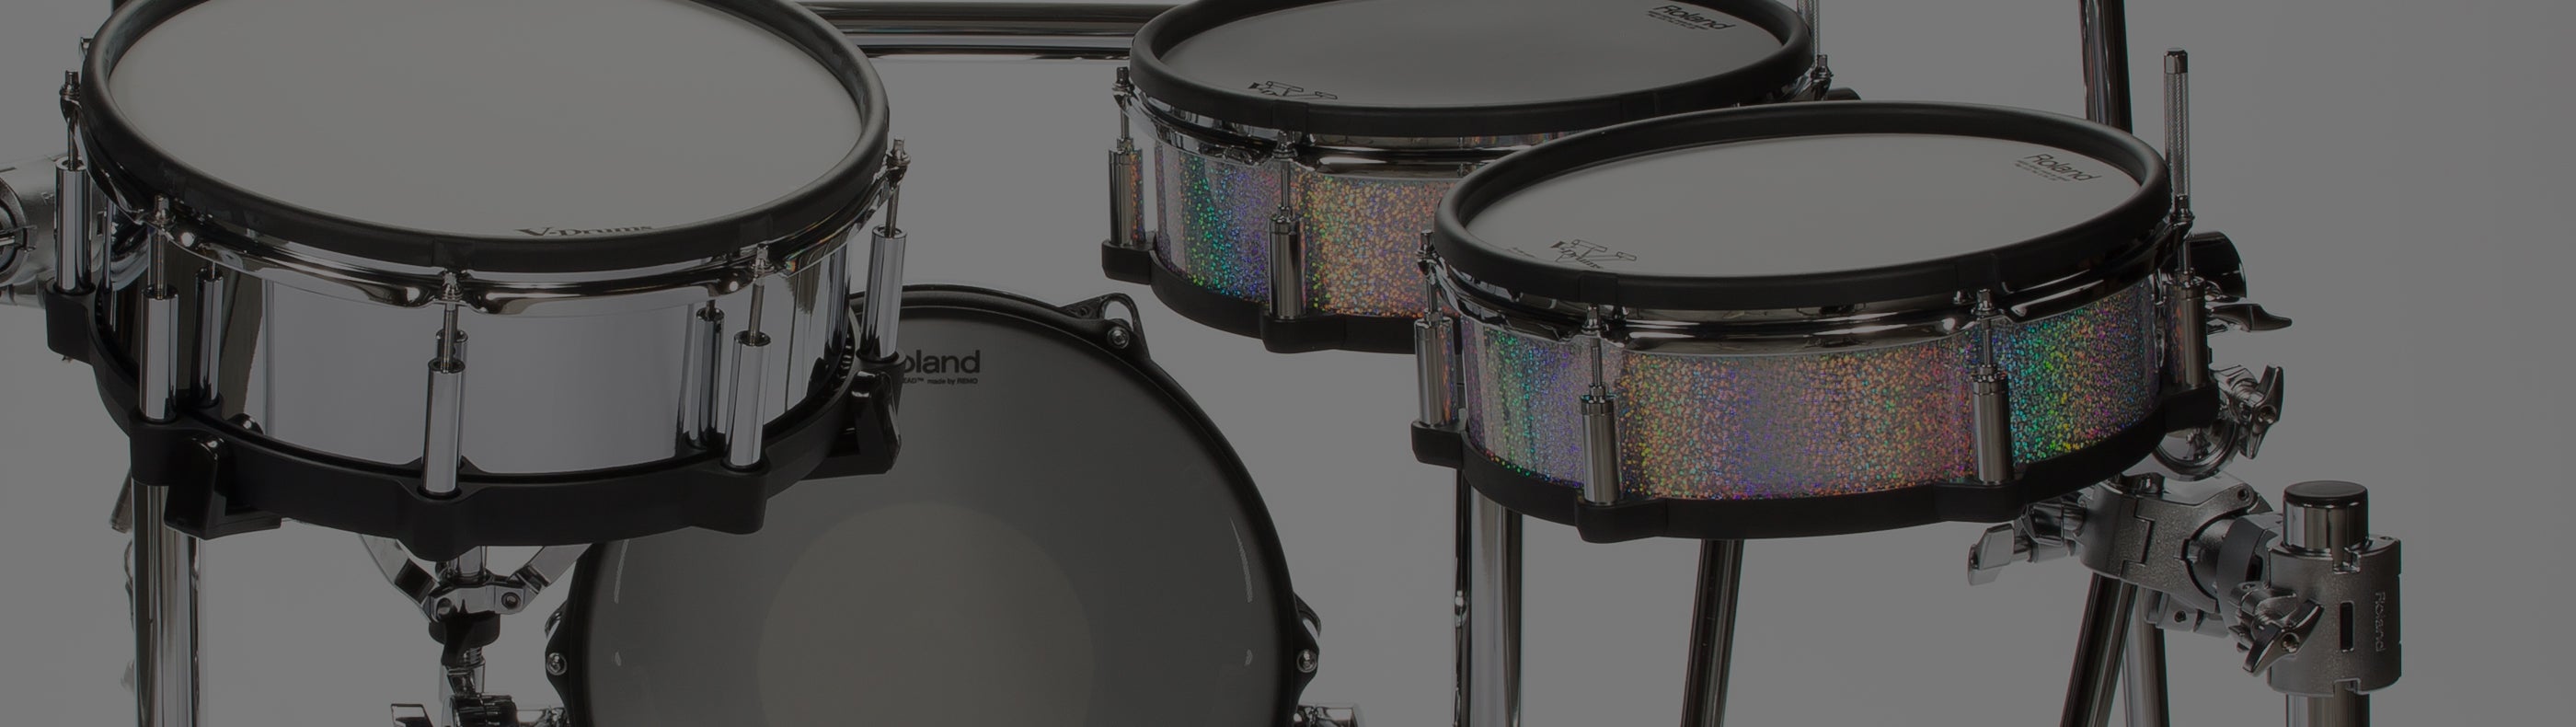 Roland Electronic Drums